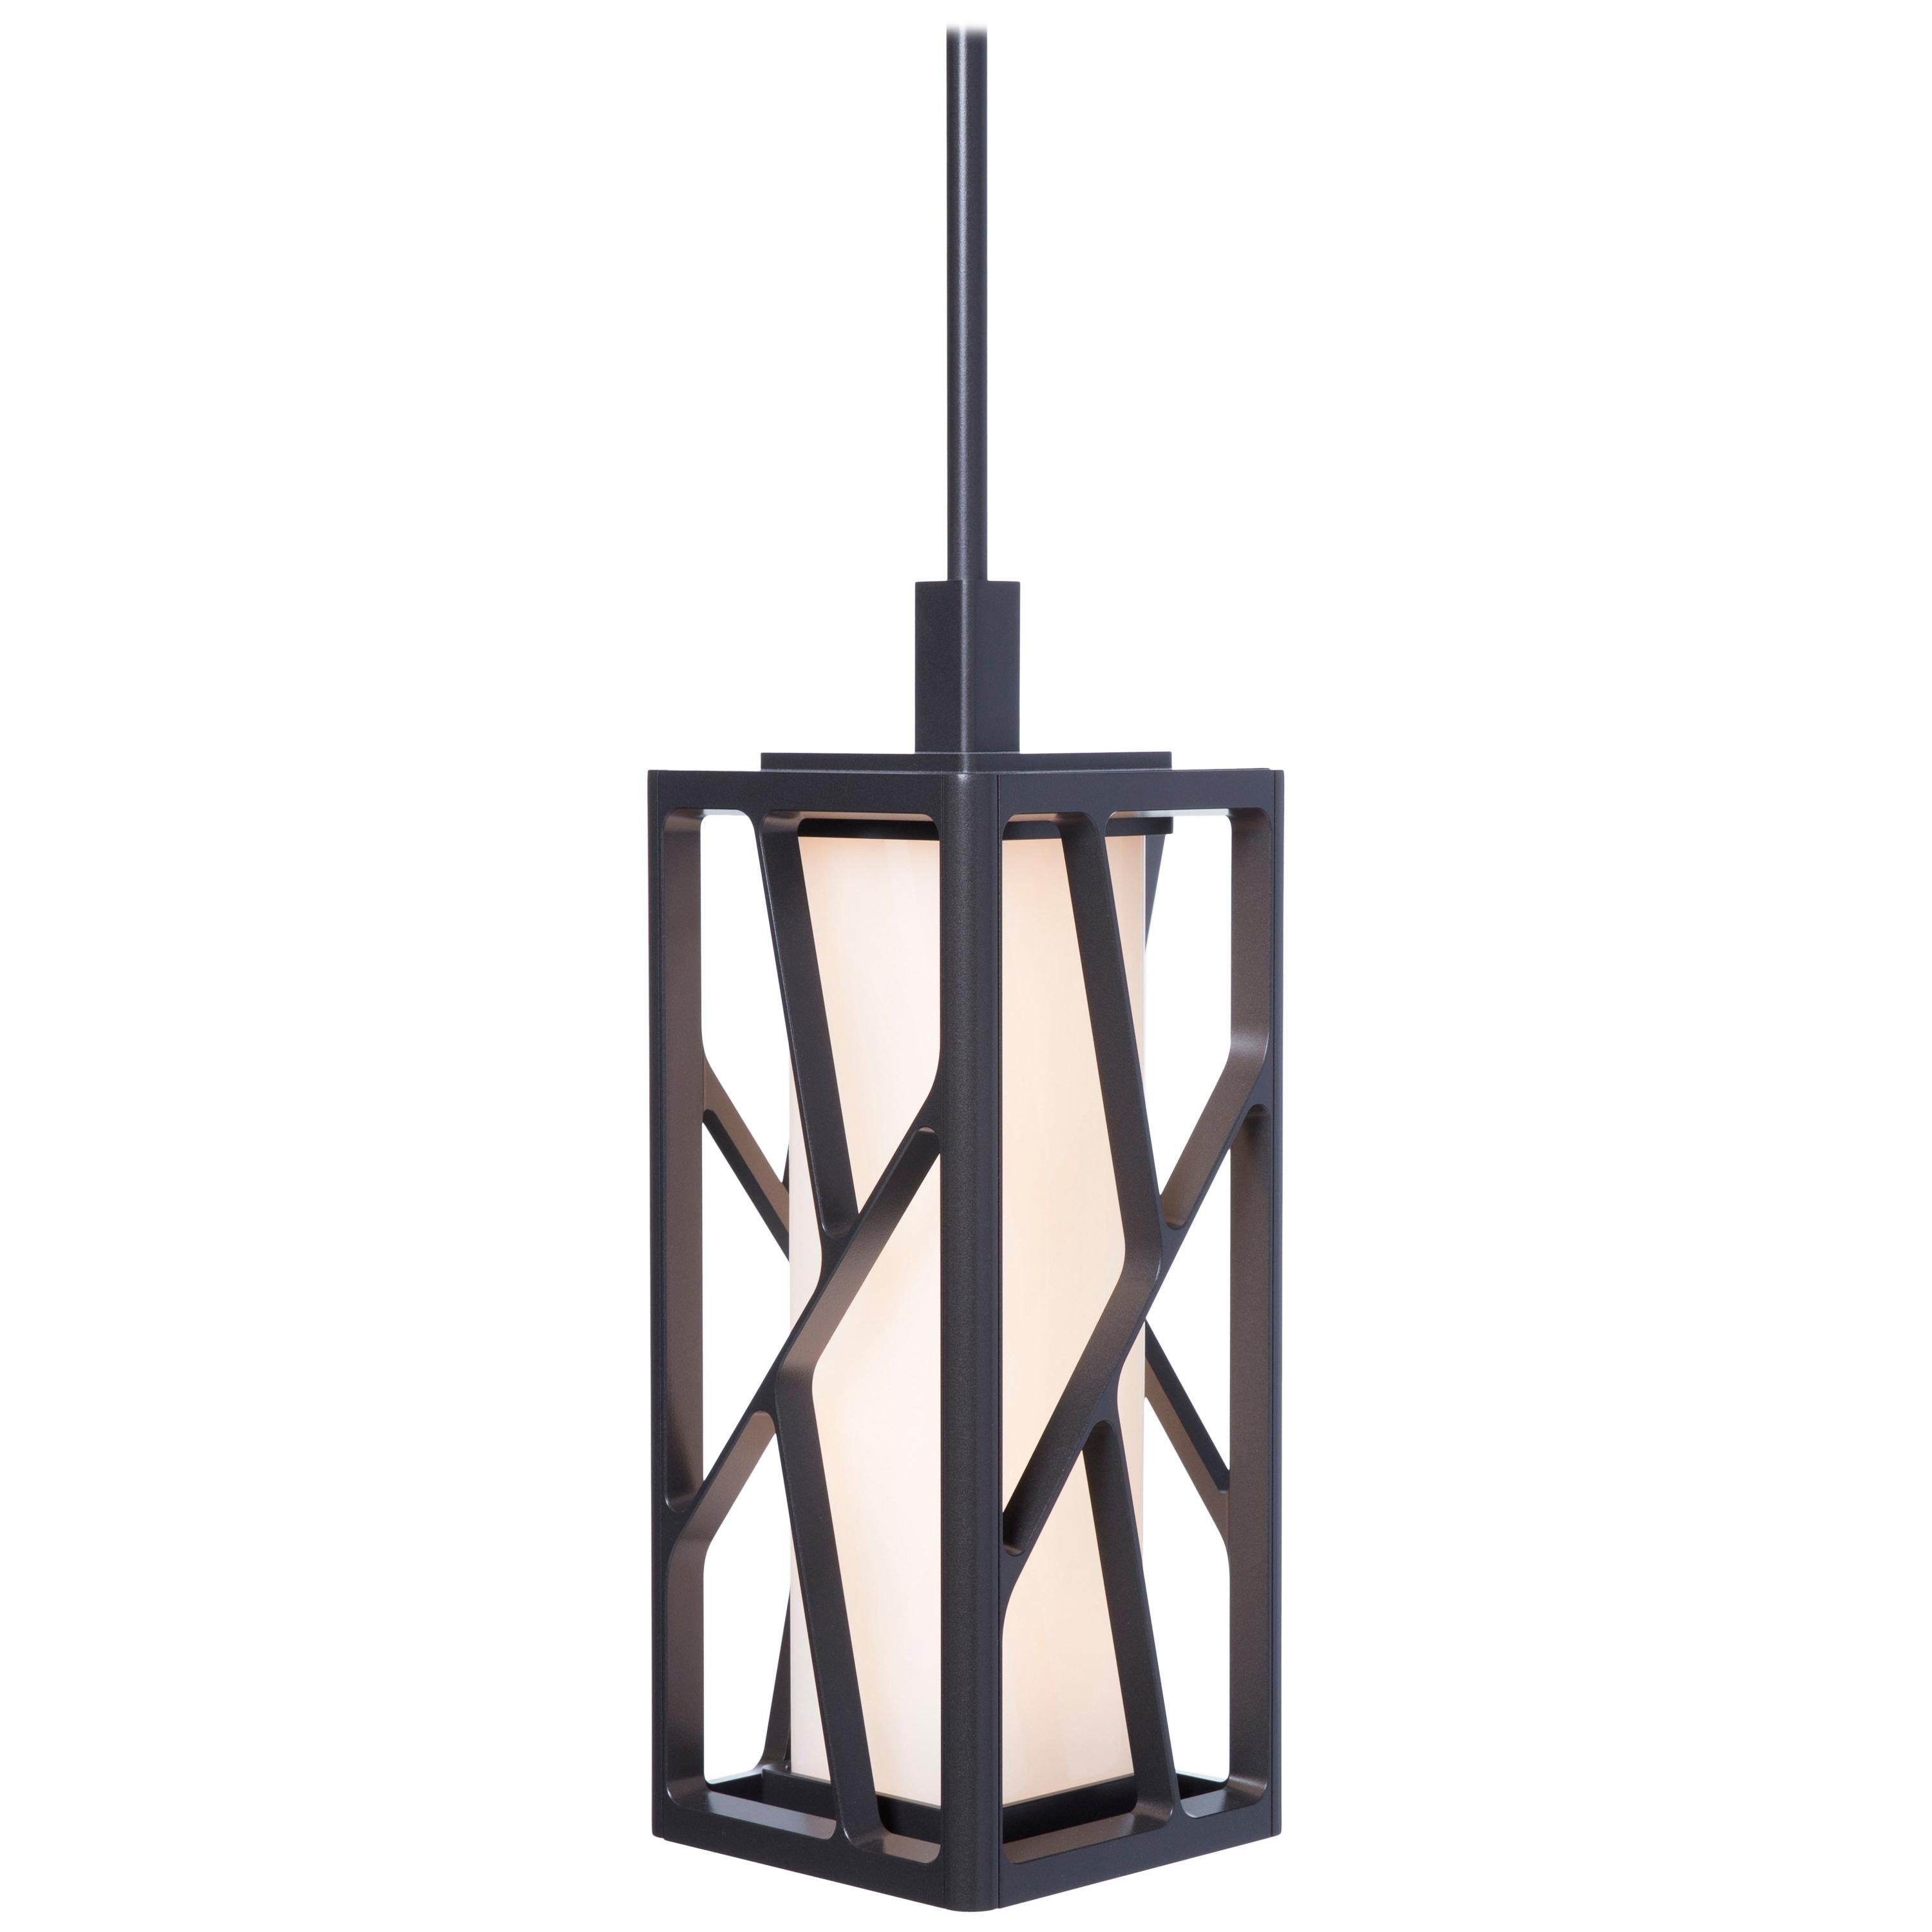 HOLLY HUNT Reef LED Pendant in Aluminum Structure with Obsidian Finish